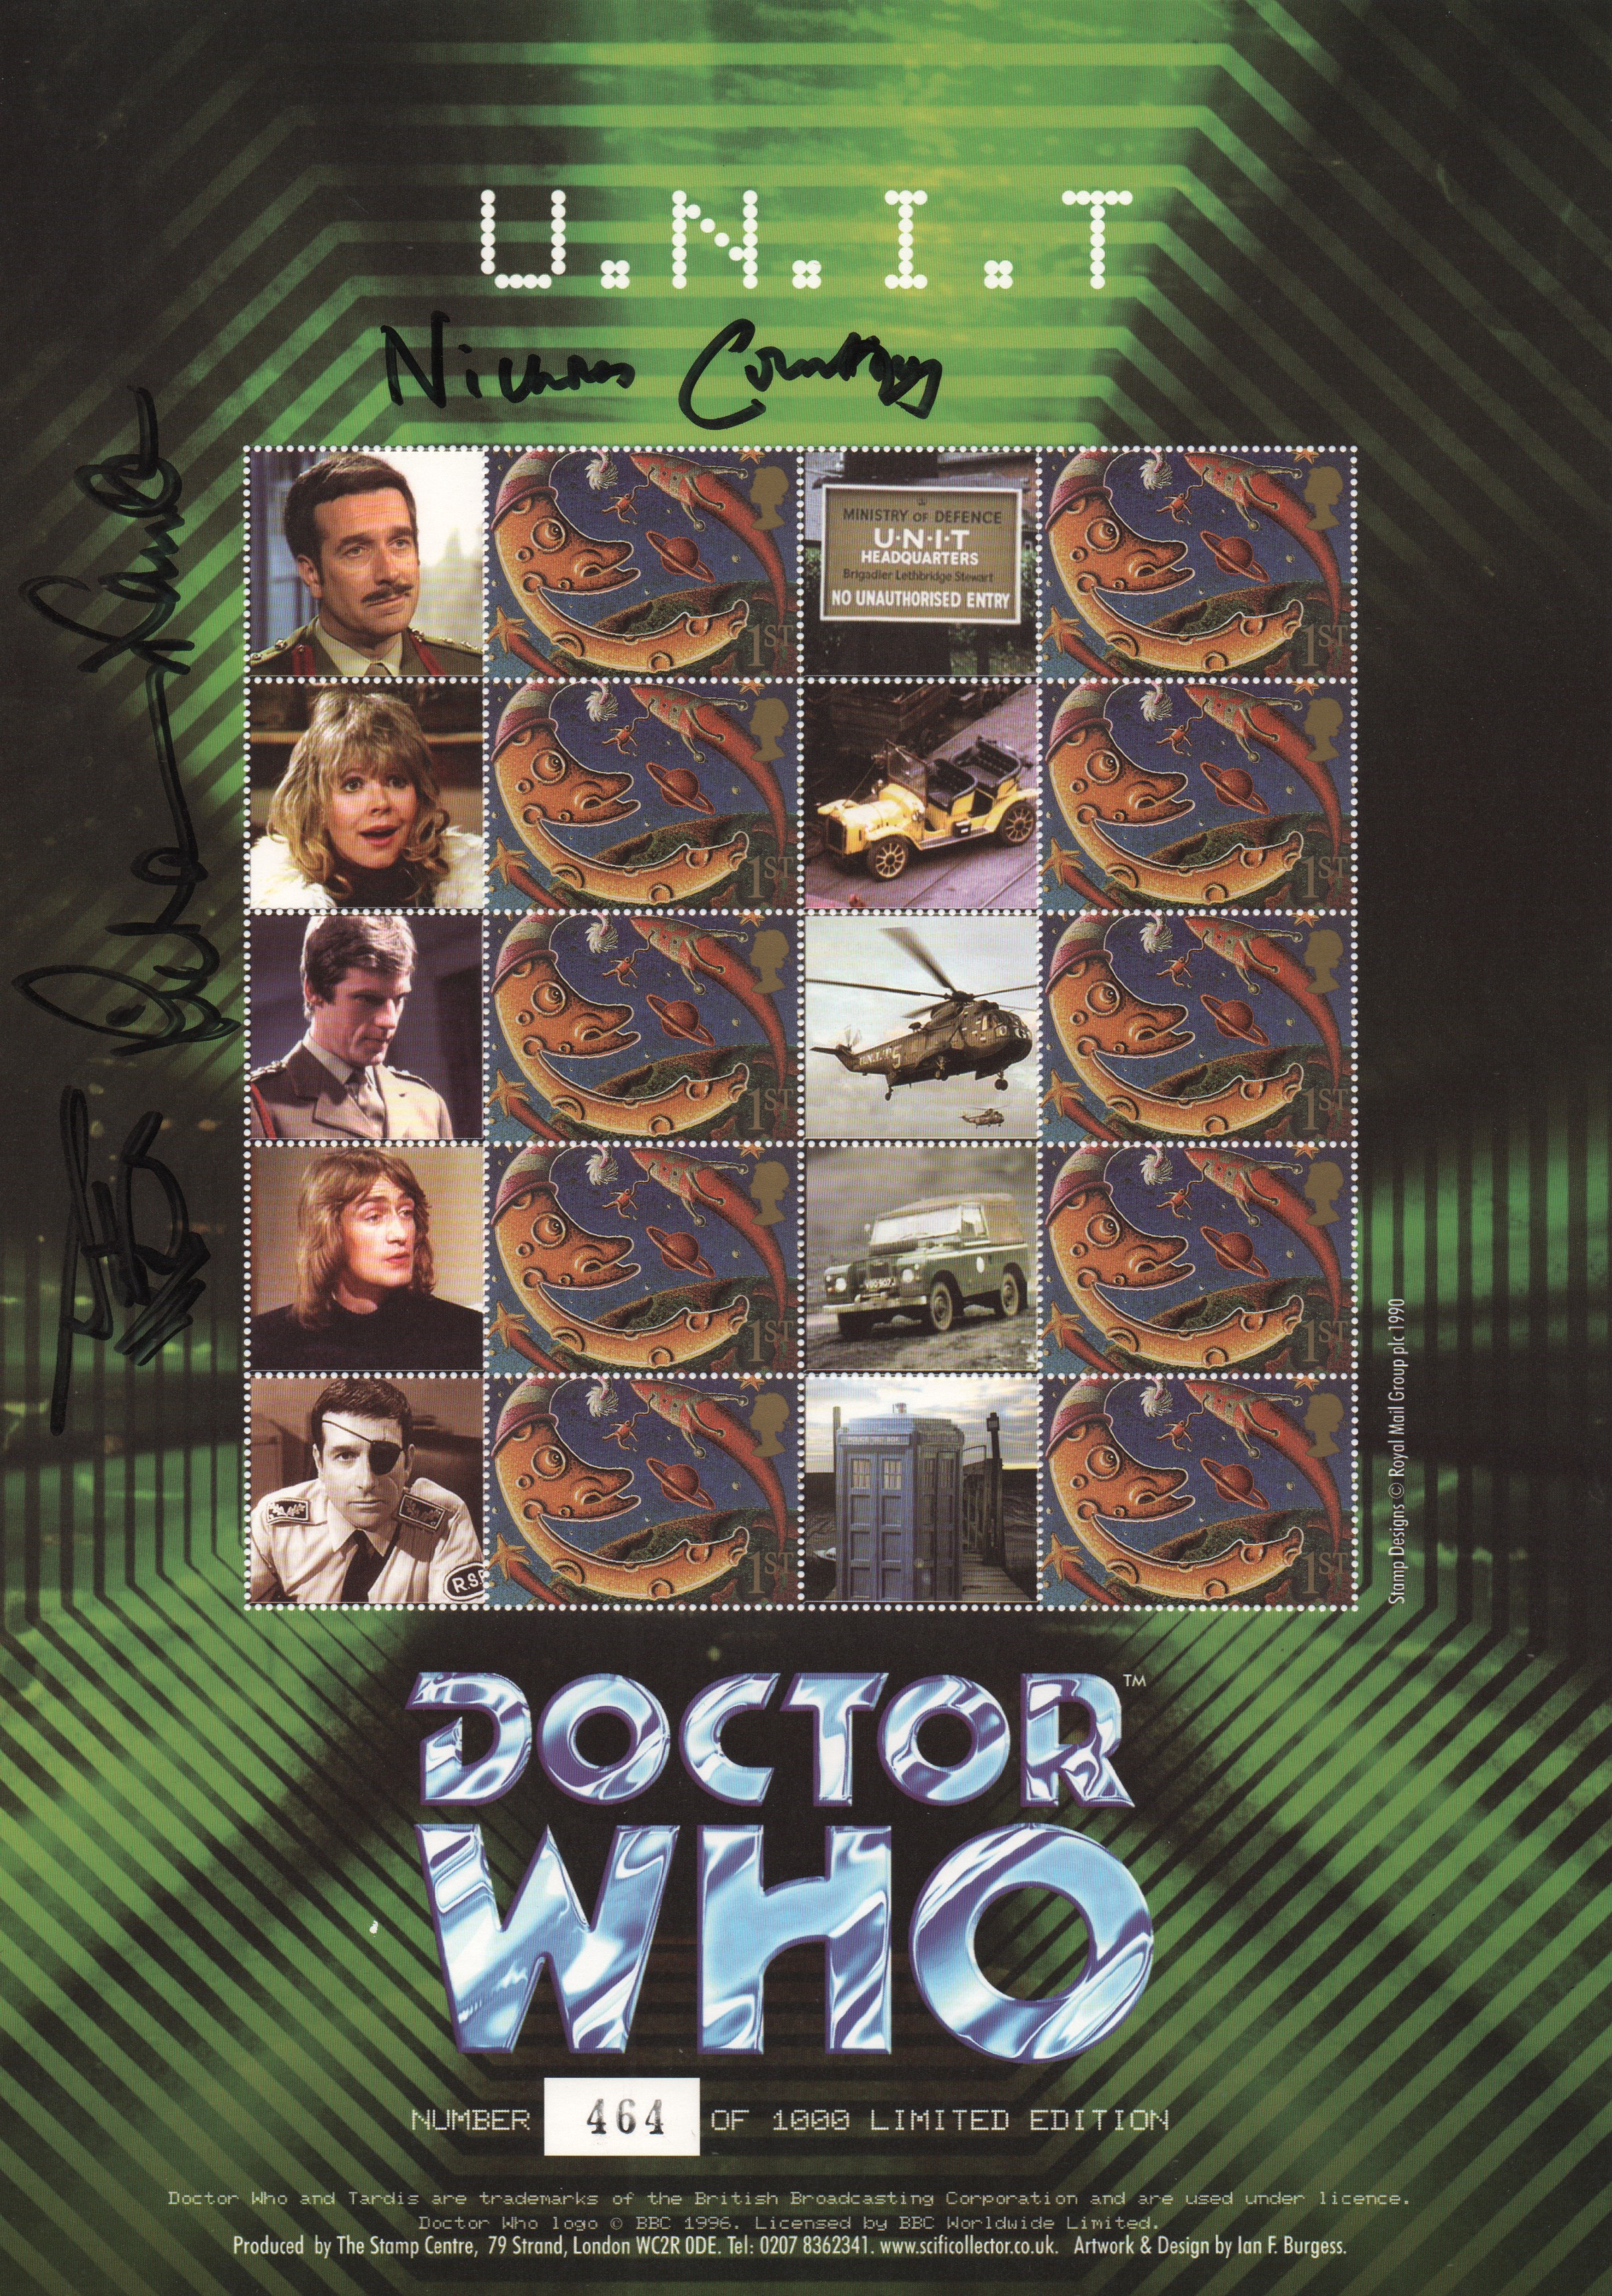 Doctor Who UNIT Stamp Sheet Official Limited Edition Signed Nicholas Courtney, Richard Franklin & Stewart Bevan